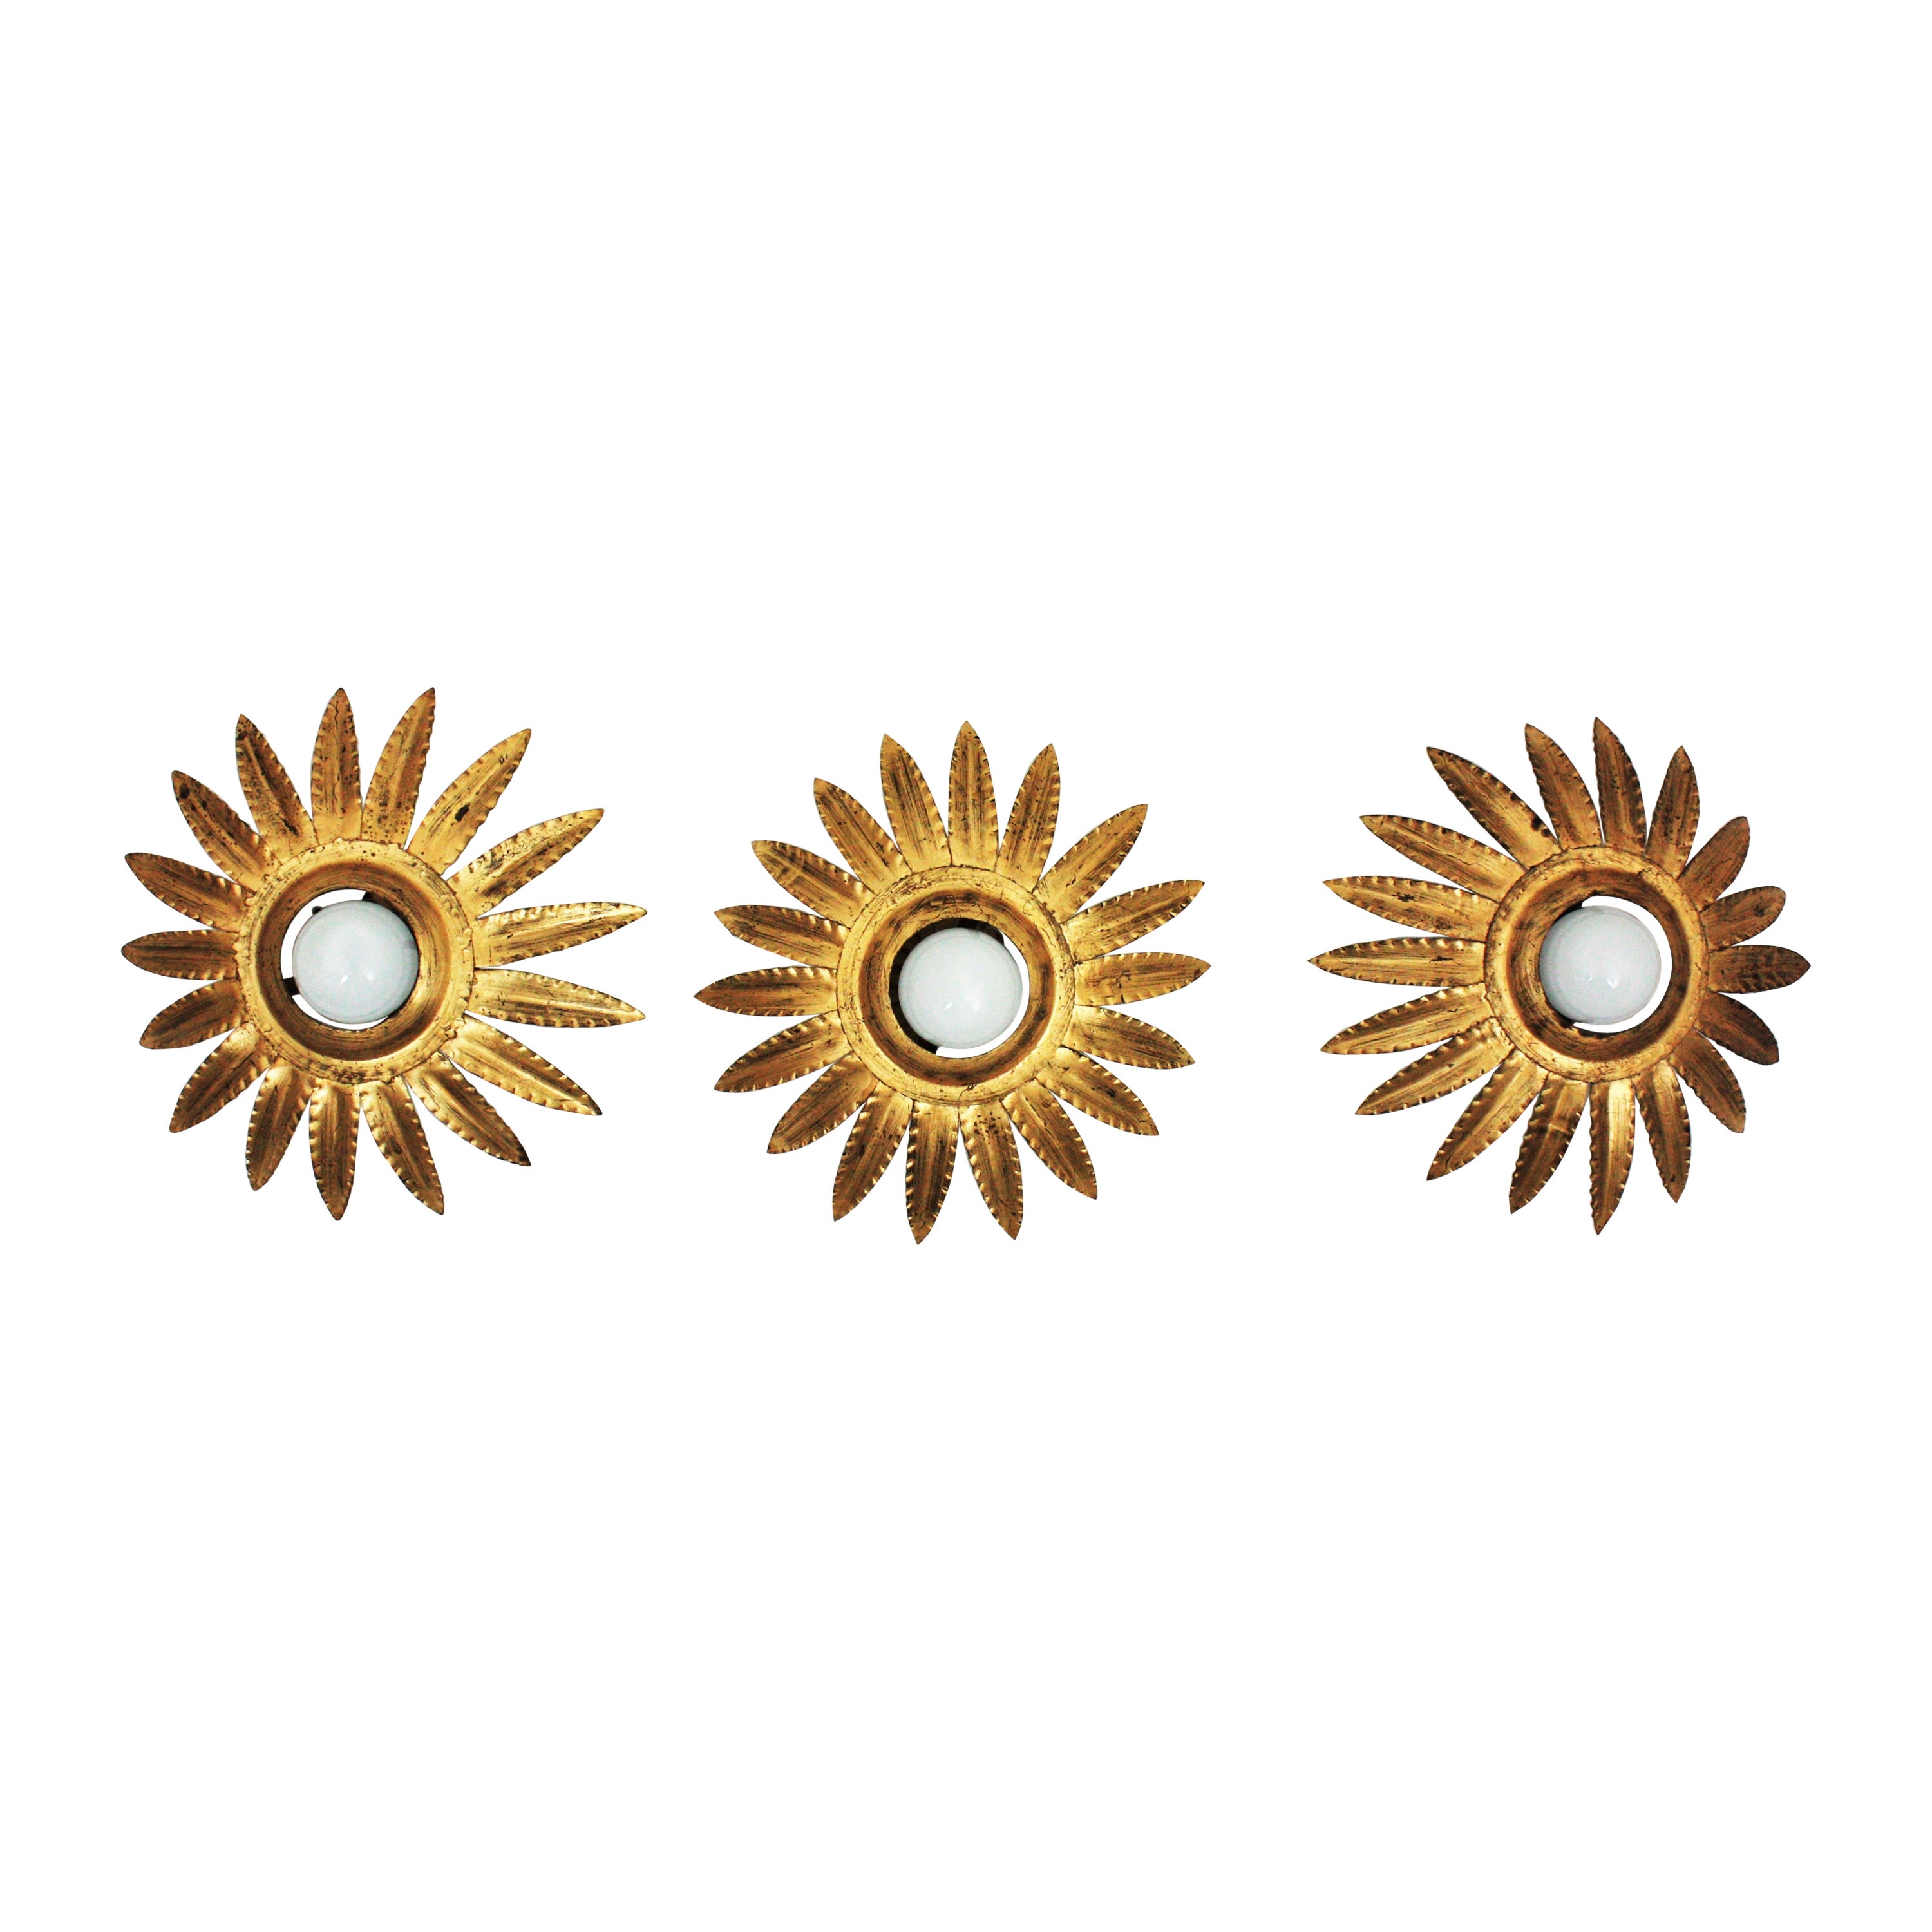 Set of three sunburst starburst gil iron wall sconces or ceiling lights. Spain, 1960s.
These eye-caching light fixtures are handcrafted in gilt wrought. They have sunburst or flower shaped frames surrounding a central exposed bulb. Finished in gold